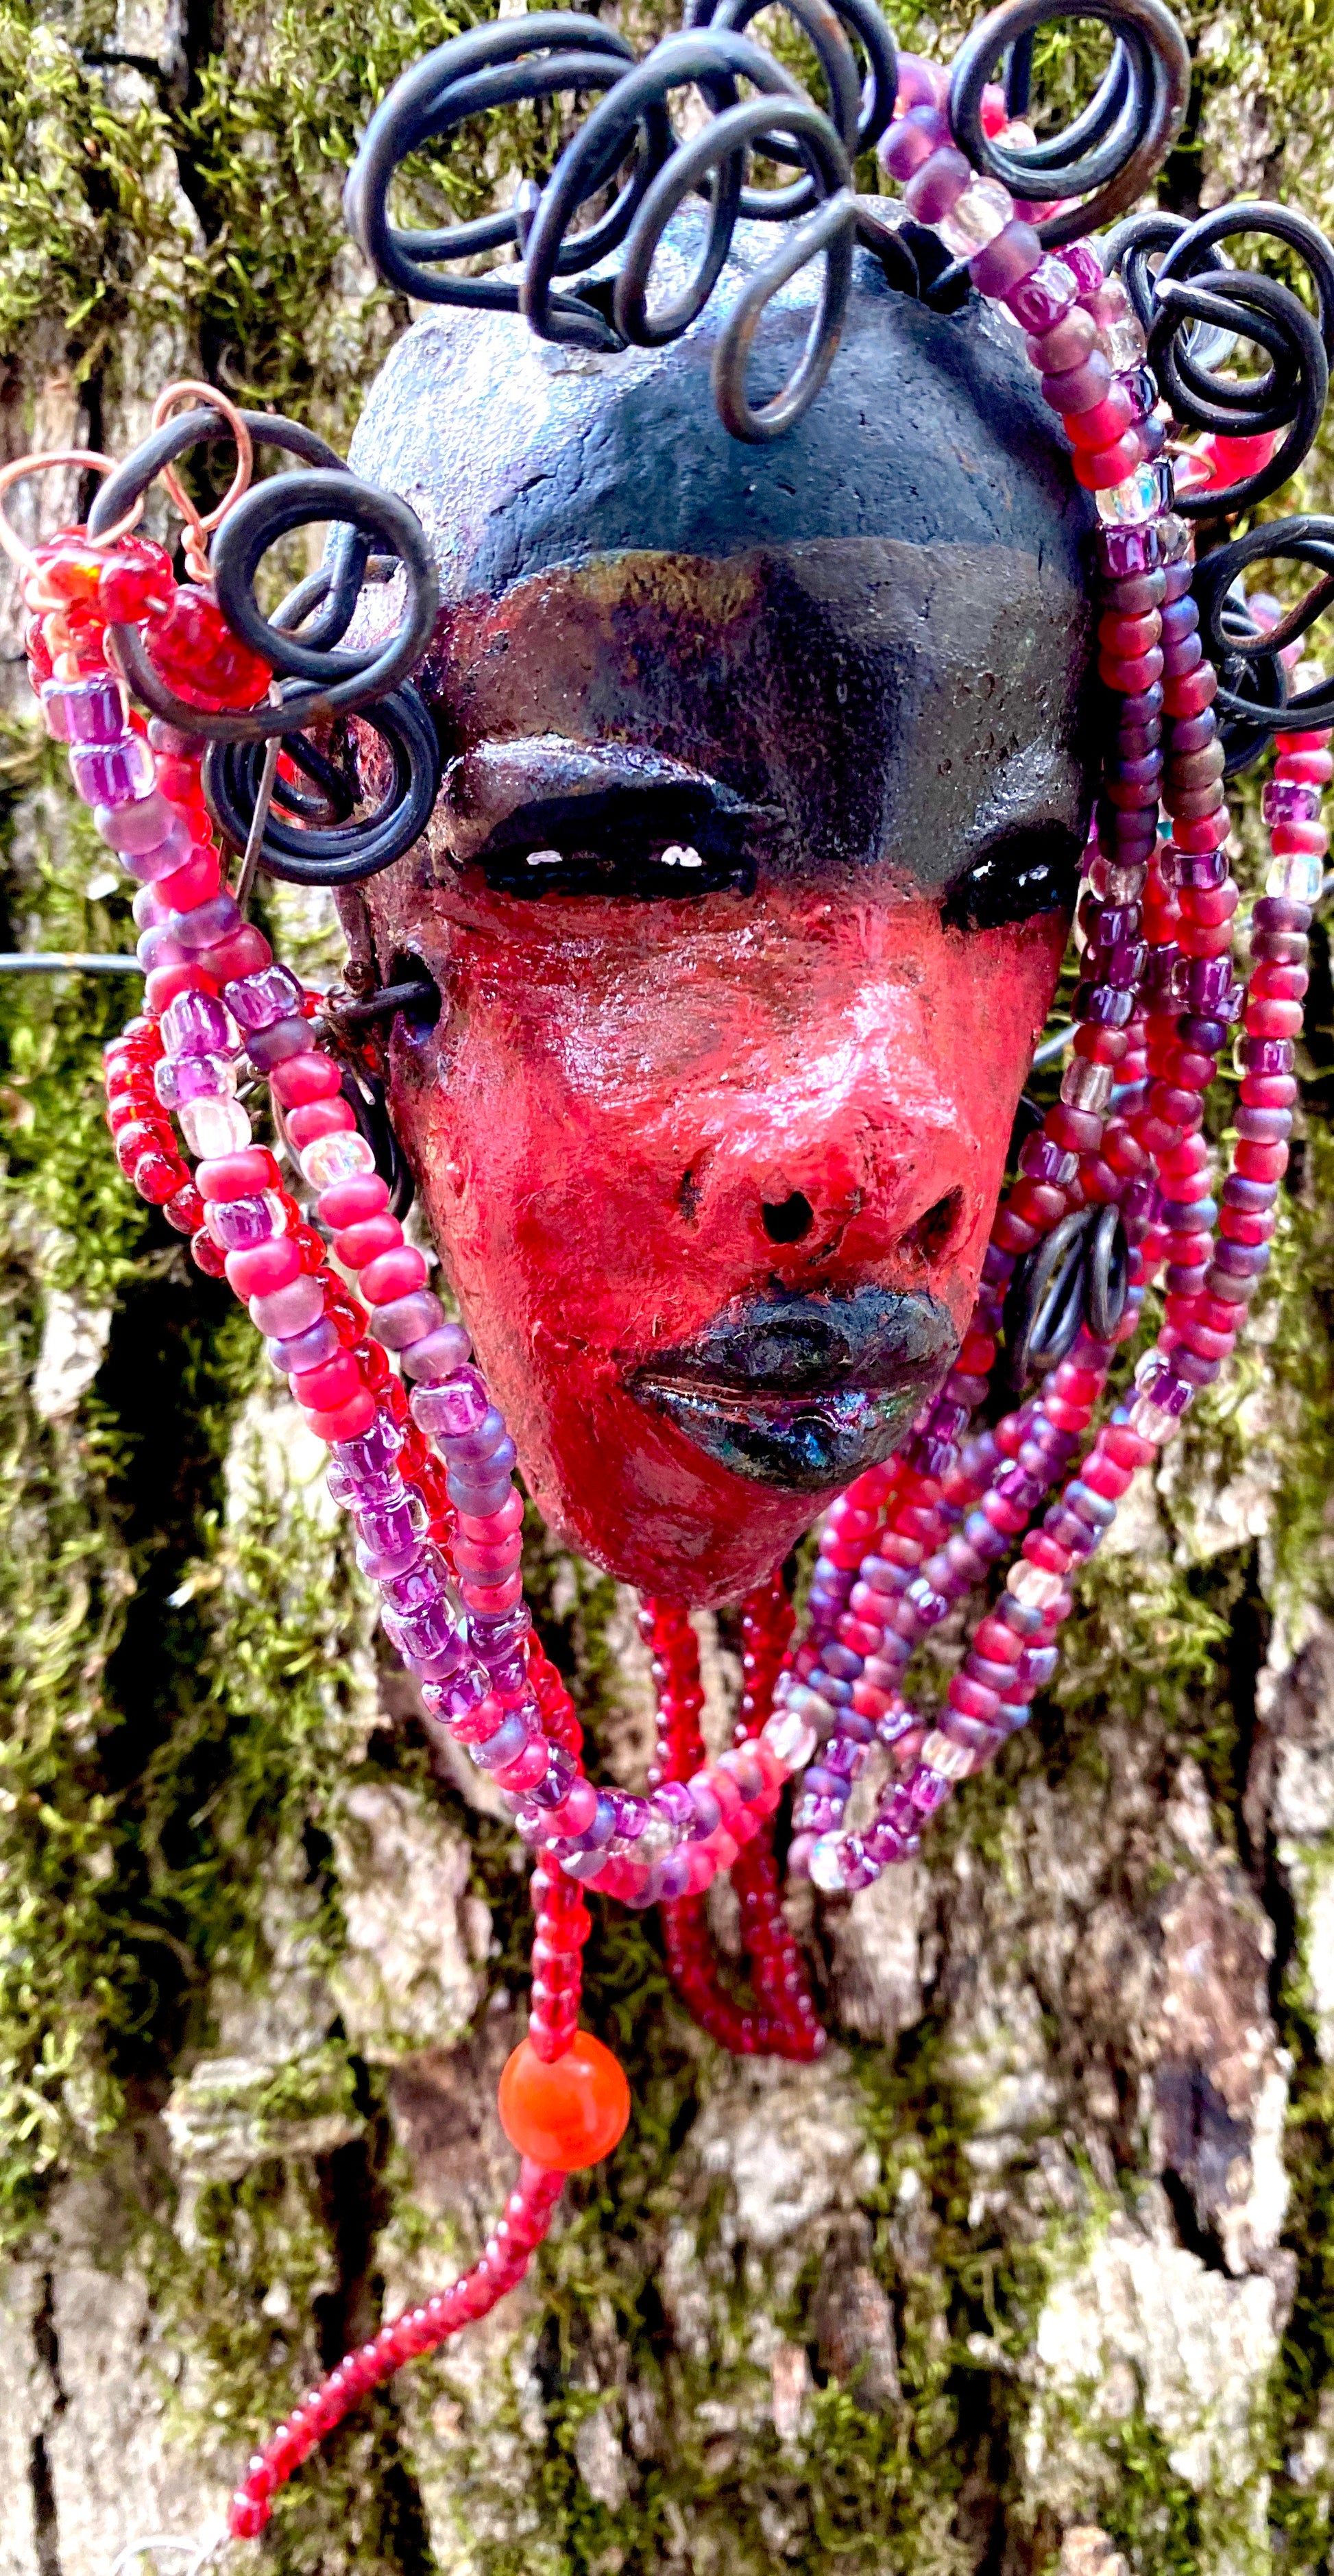  Meet Hariel! I started making art soon after seeing authentic African artwork at the Smithsonian Museum of African Art. I was in total awe. Jafari was inspired by my visit there.   Hariel has a two tone red and dark metallic copper complexion. She  is 6" x 4" and weighs 5 ozs. Hariel has over 4 feet of coiled 16 gauge wire hair and countless red mini beads..  